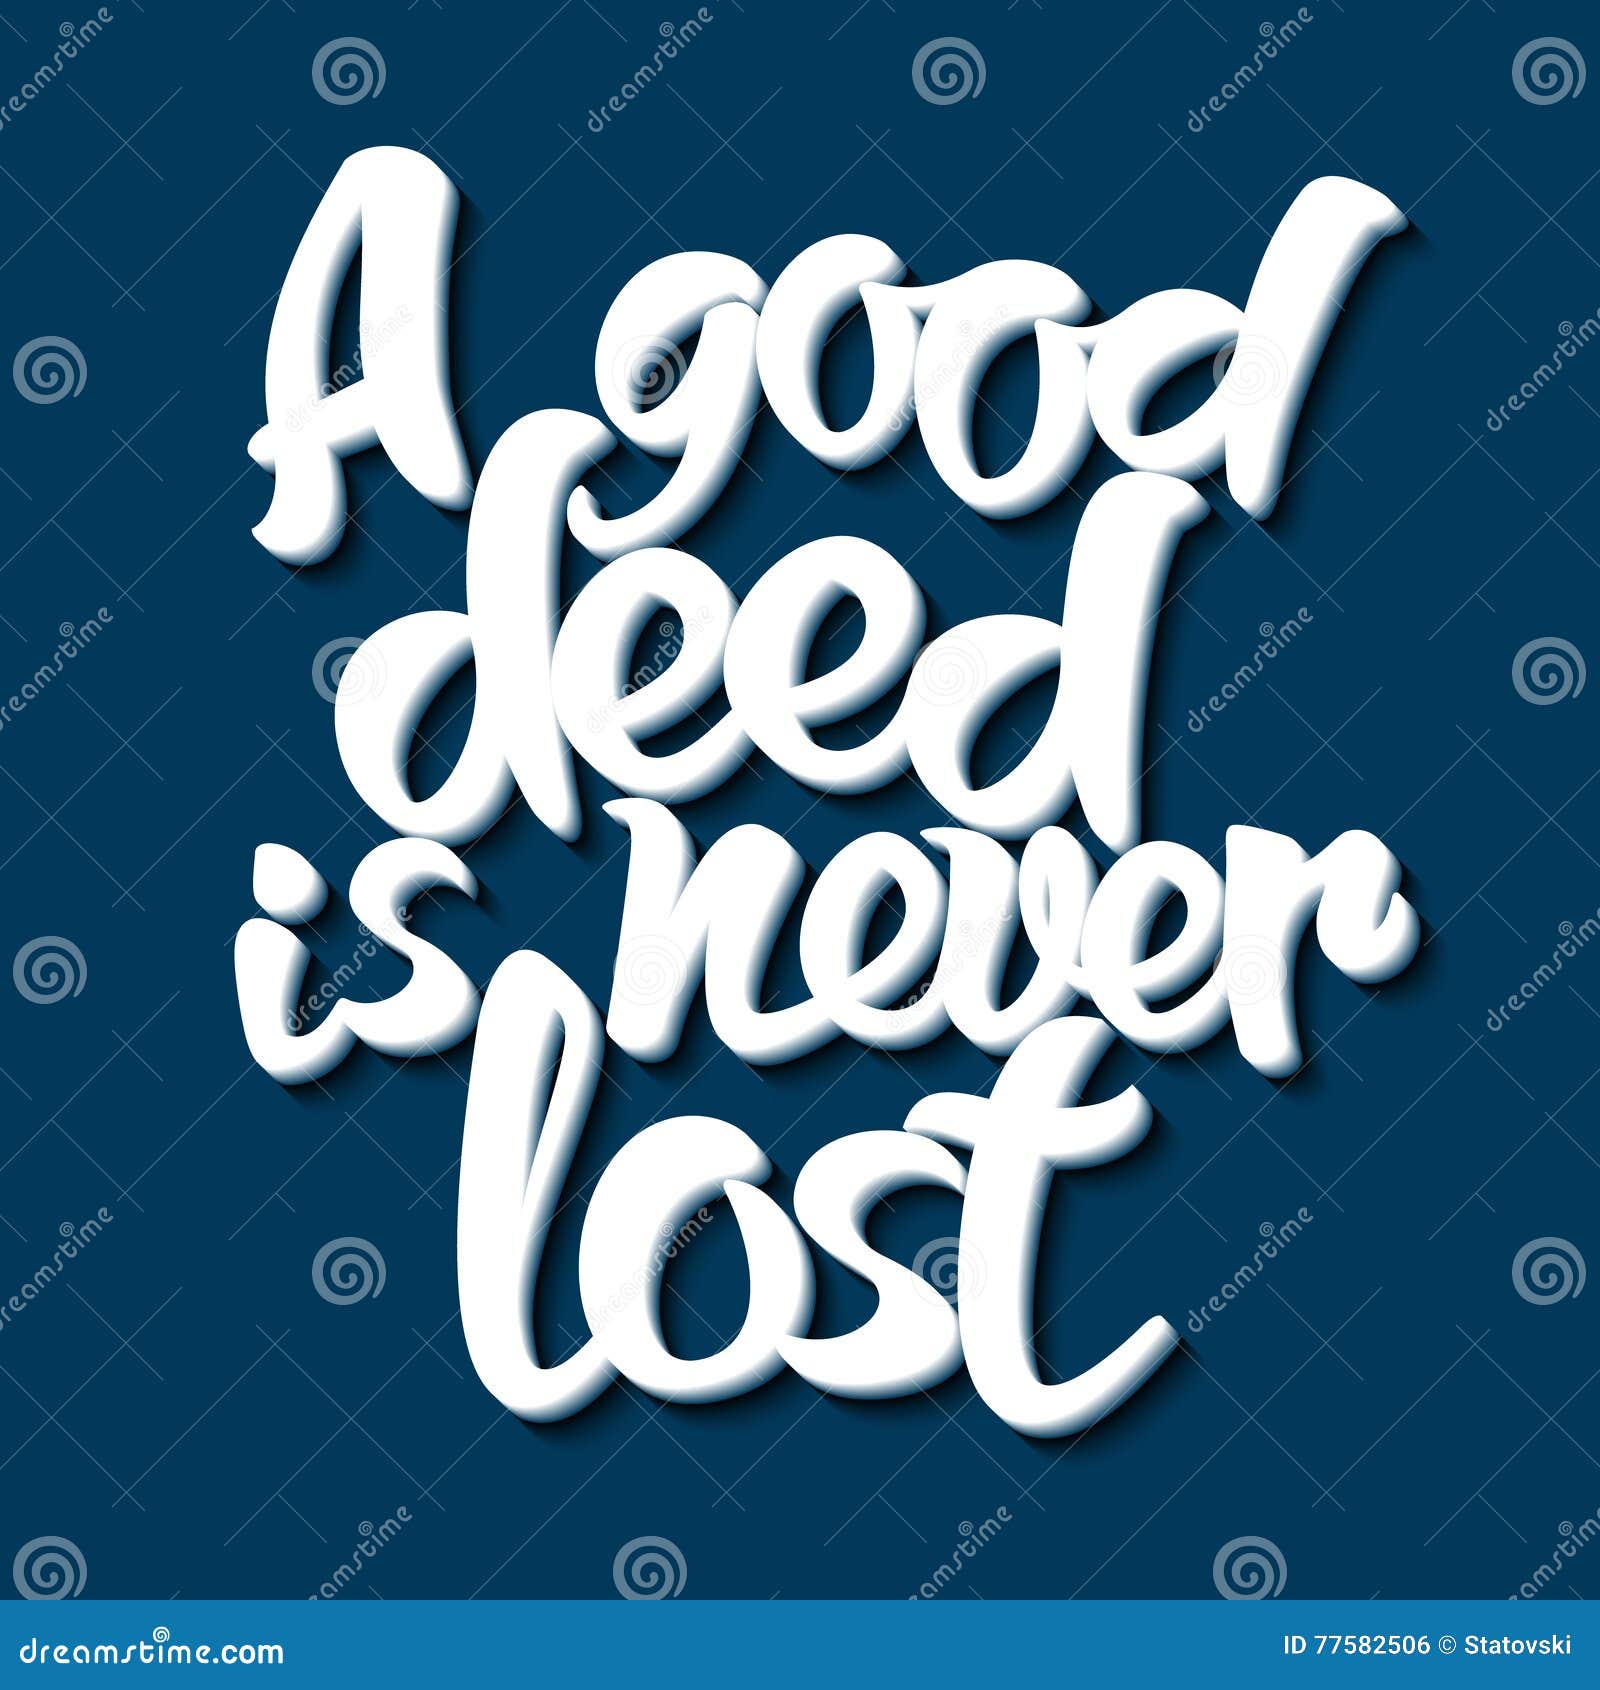 proverb a good deed is never lost.